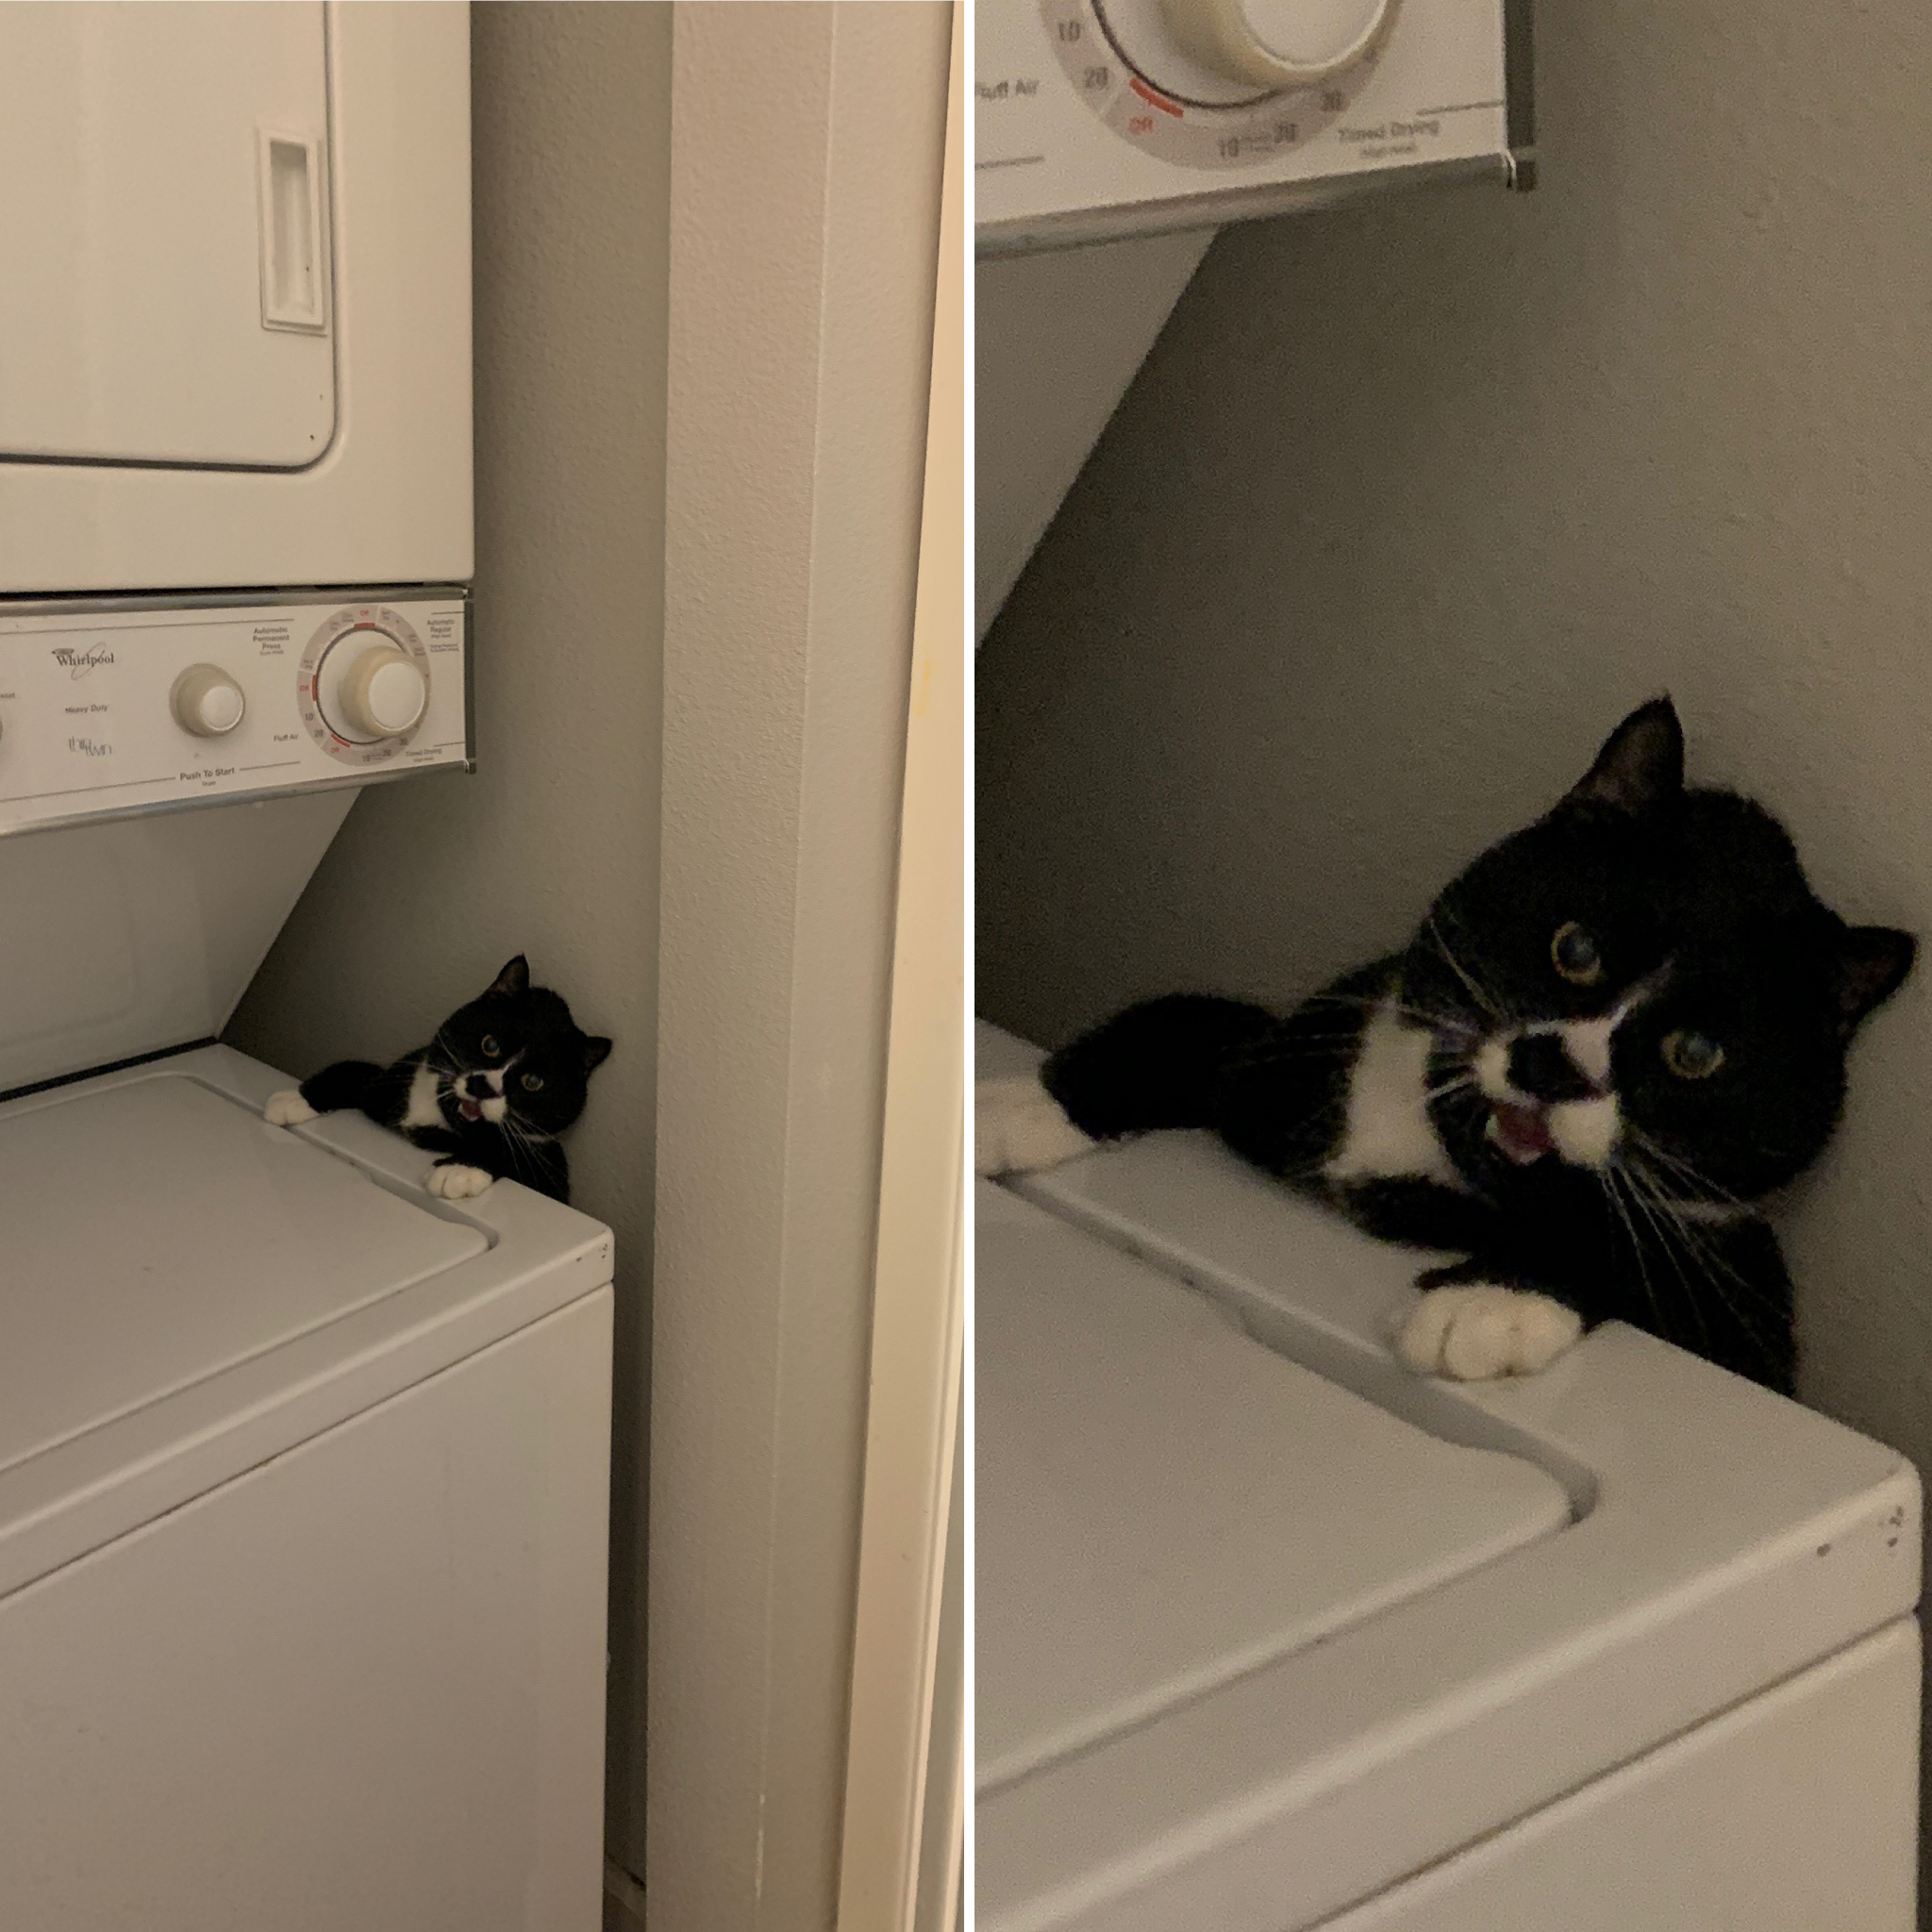 two images of a cat hanging on the side of a washer and dryer unit